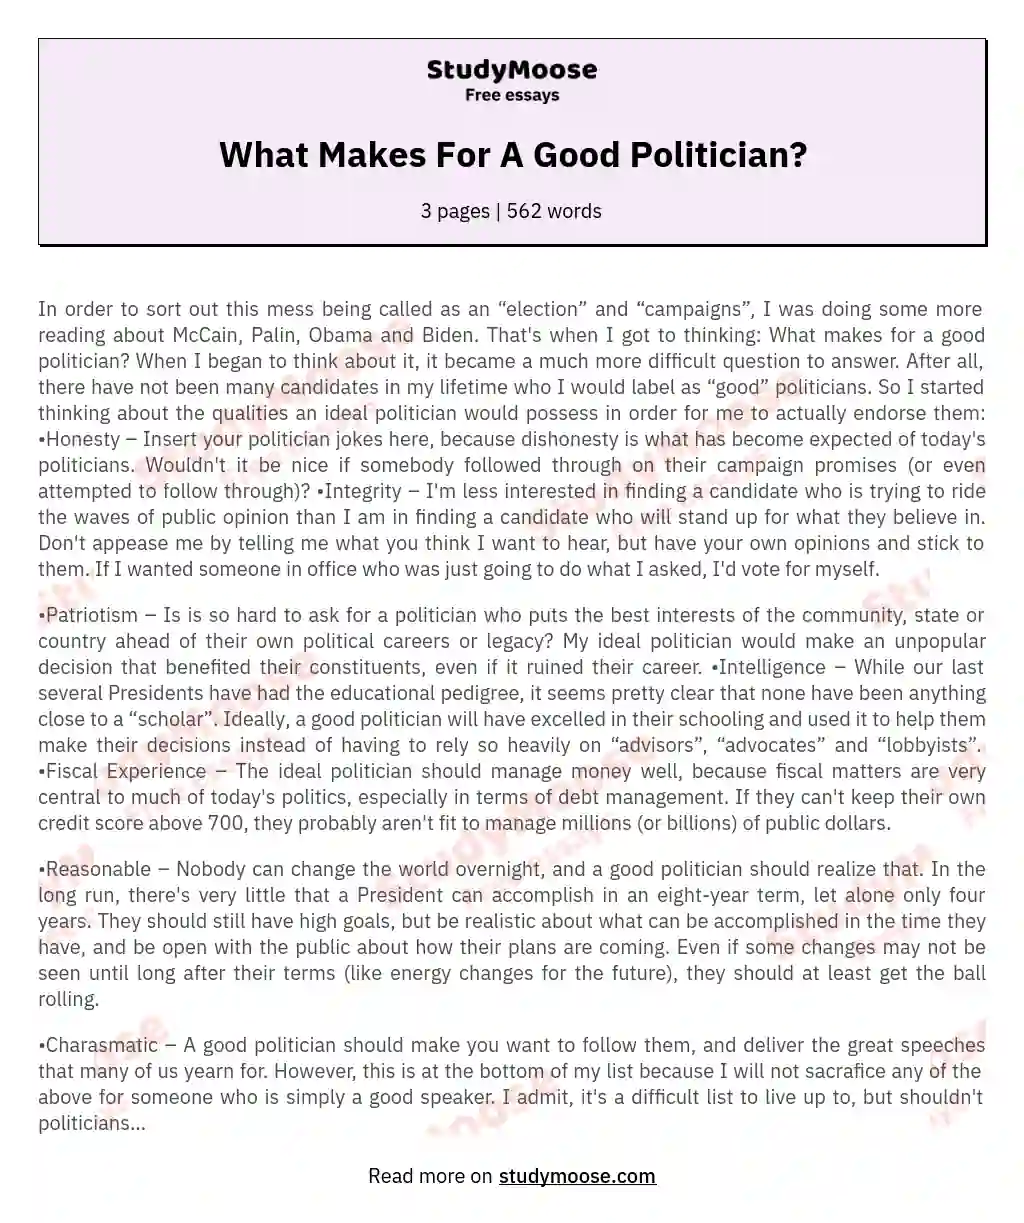 What Makes For A Good Politician? essay